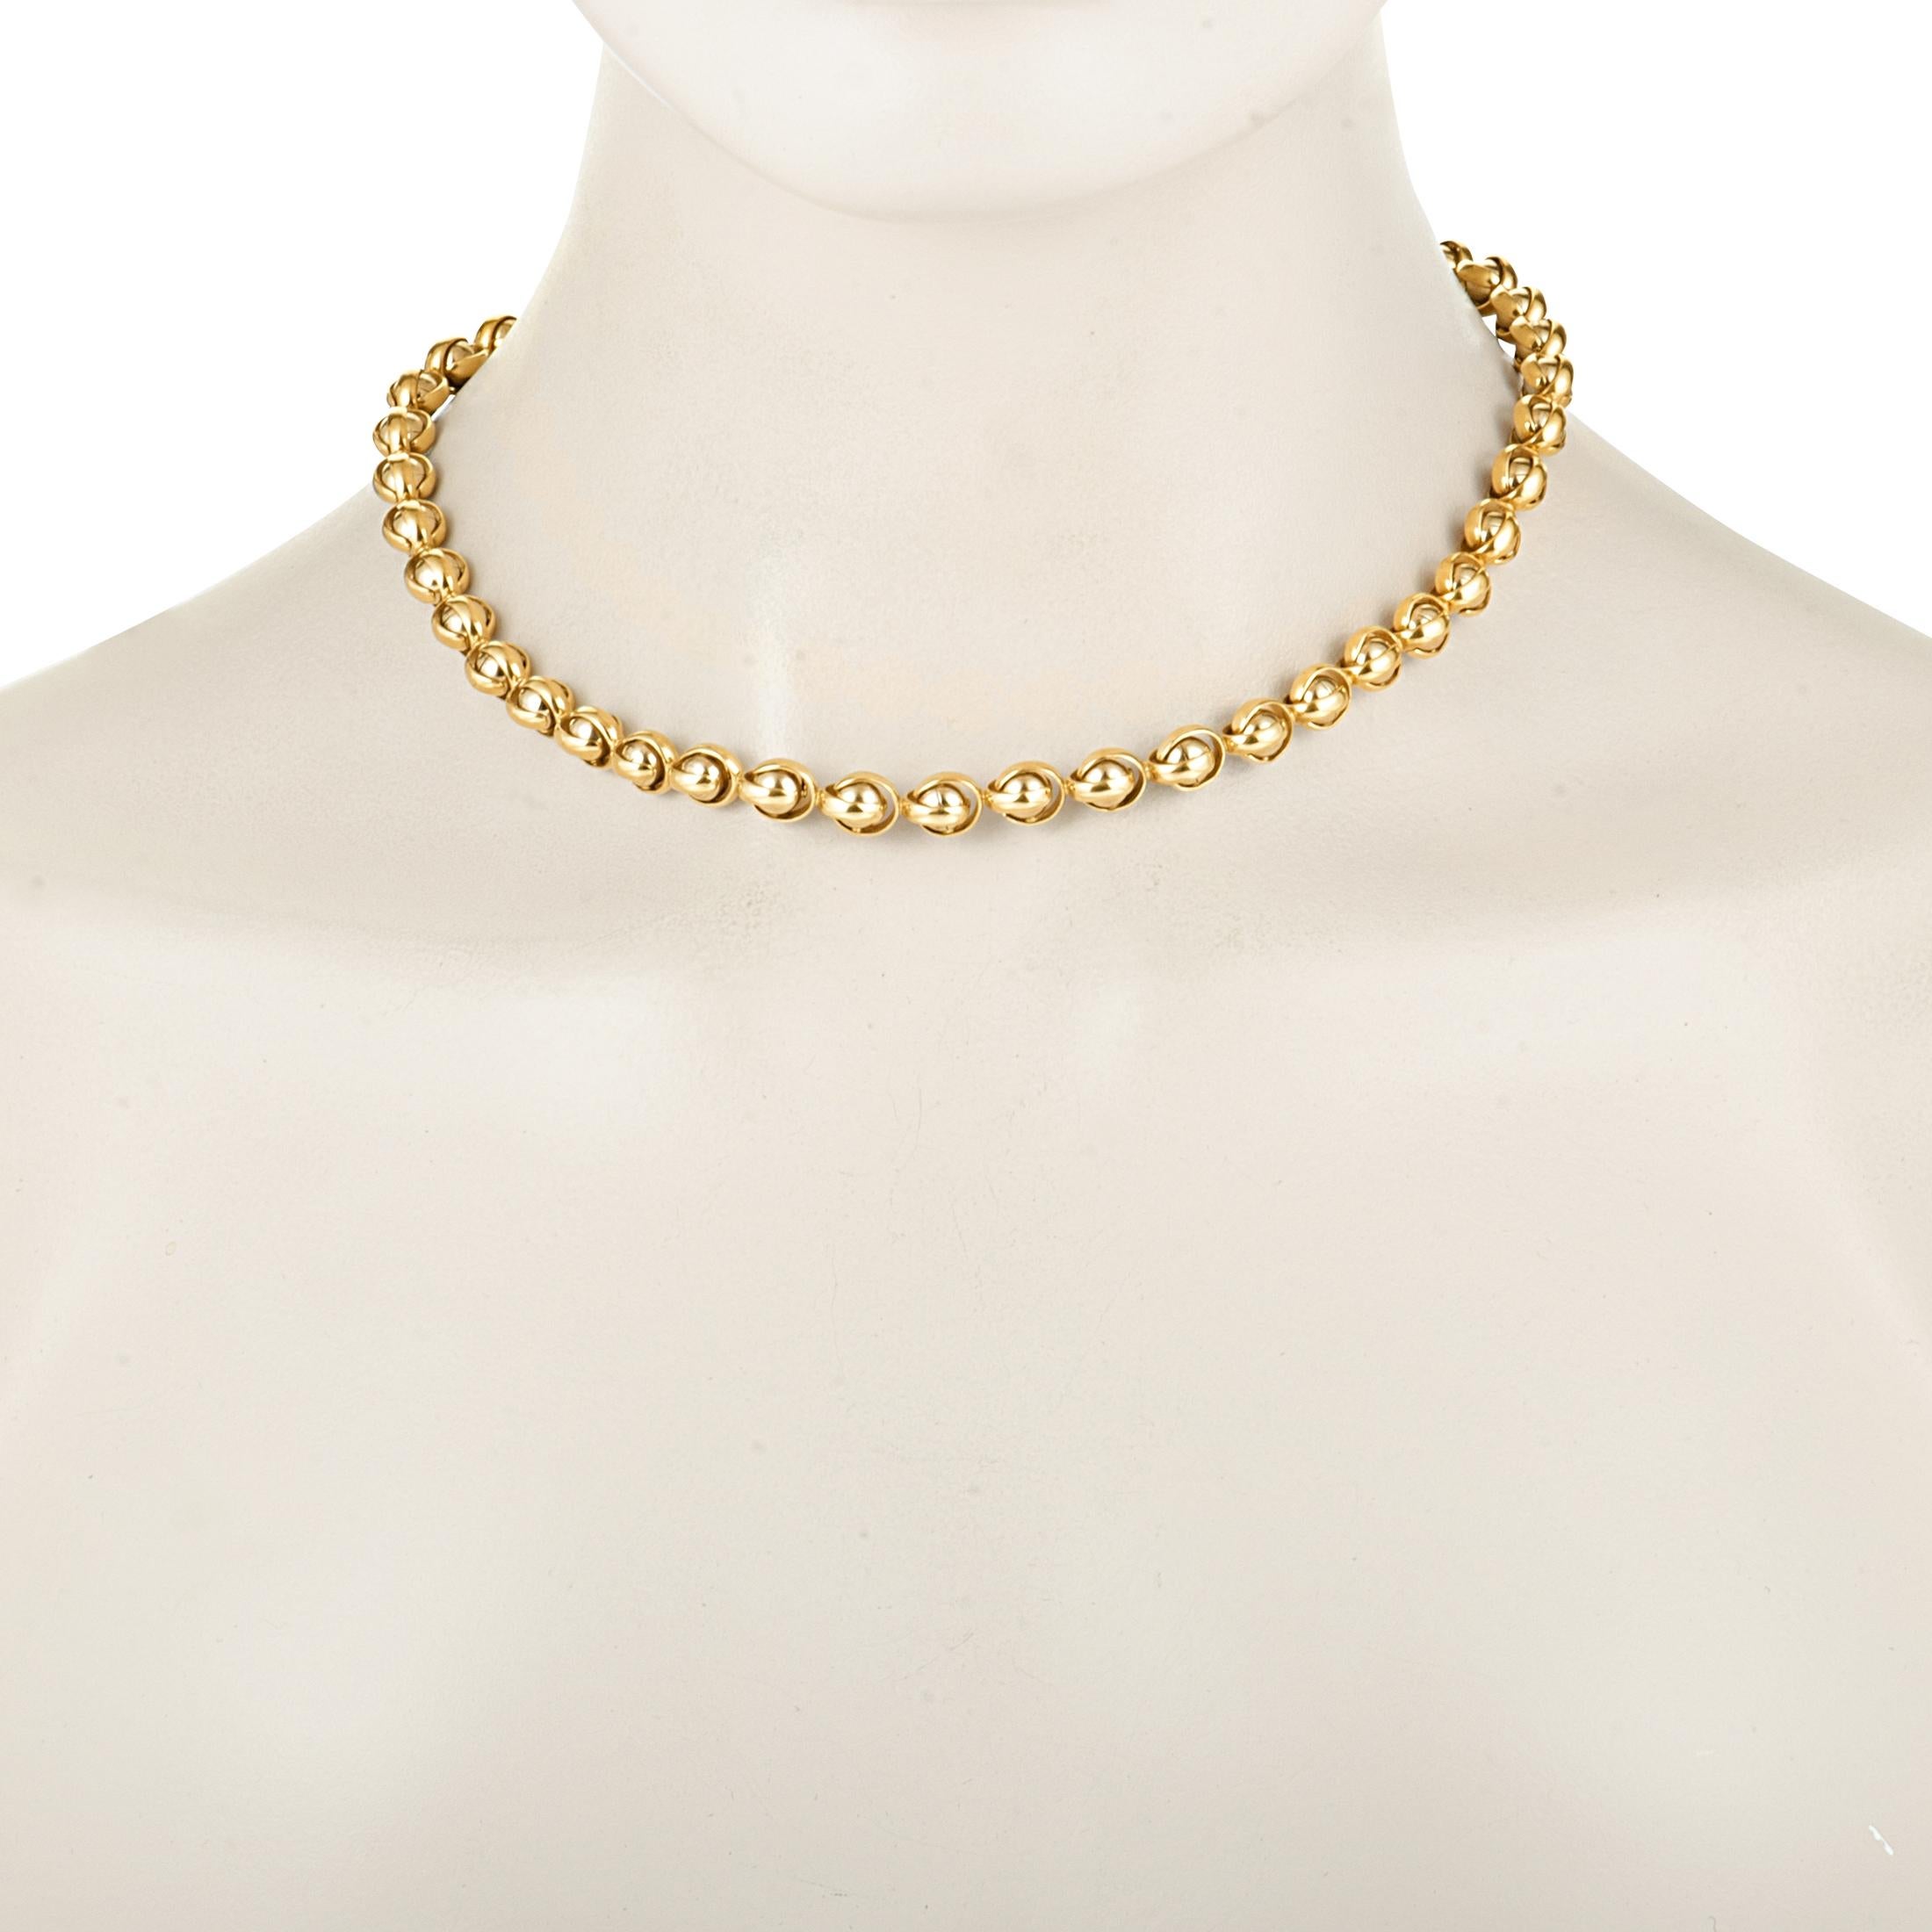 This exquisite necklace is an excellent choice if you are looking for a jewelry piece that combines the elegant appeal of classy design with the refined allure of prestigious gold. The necklace is presented by Barakà and it is masterfully crafted